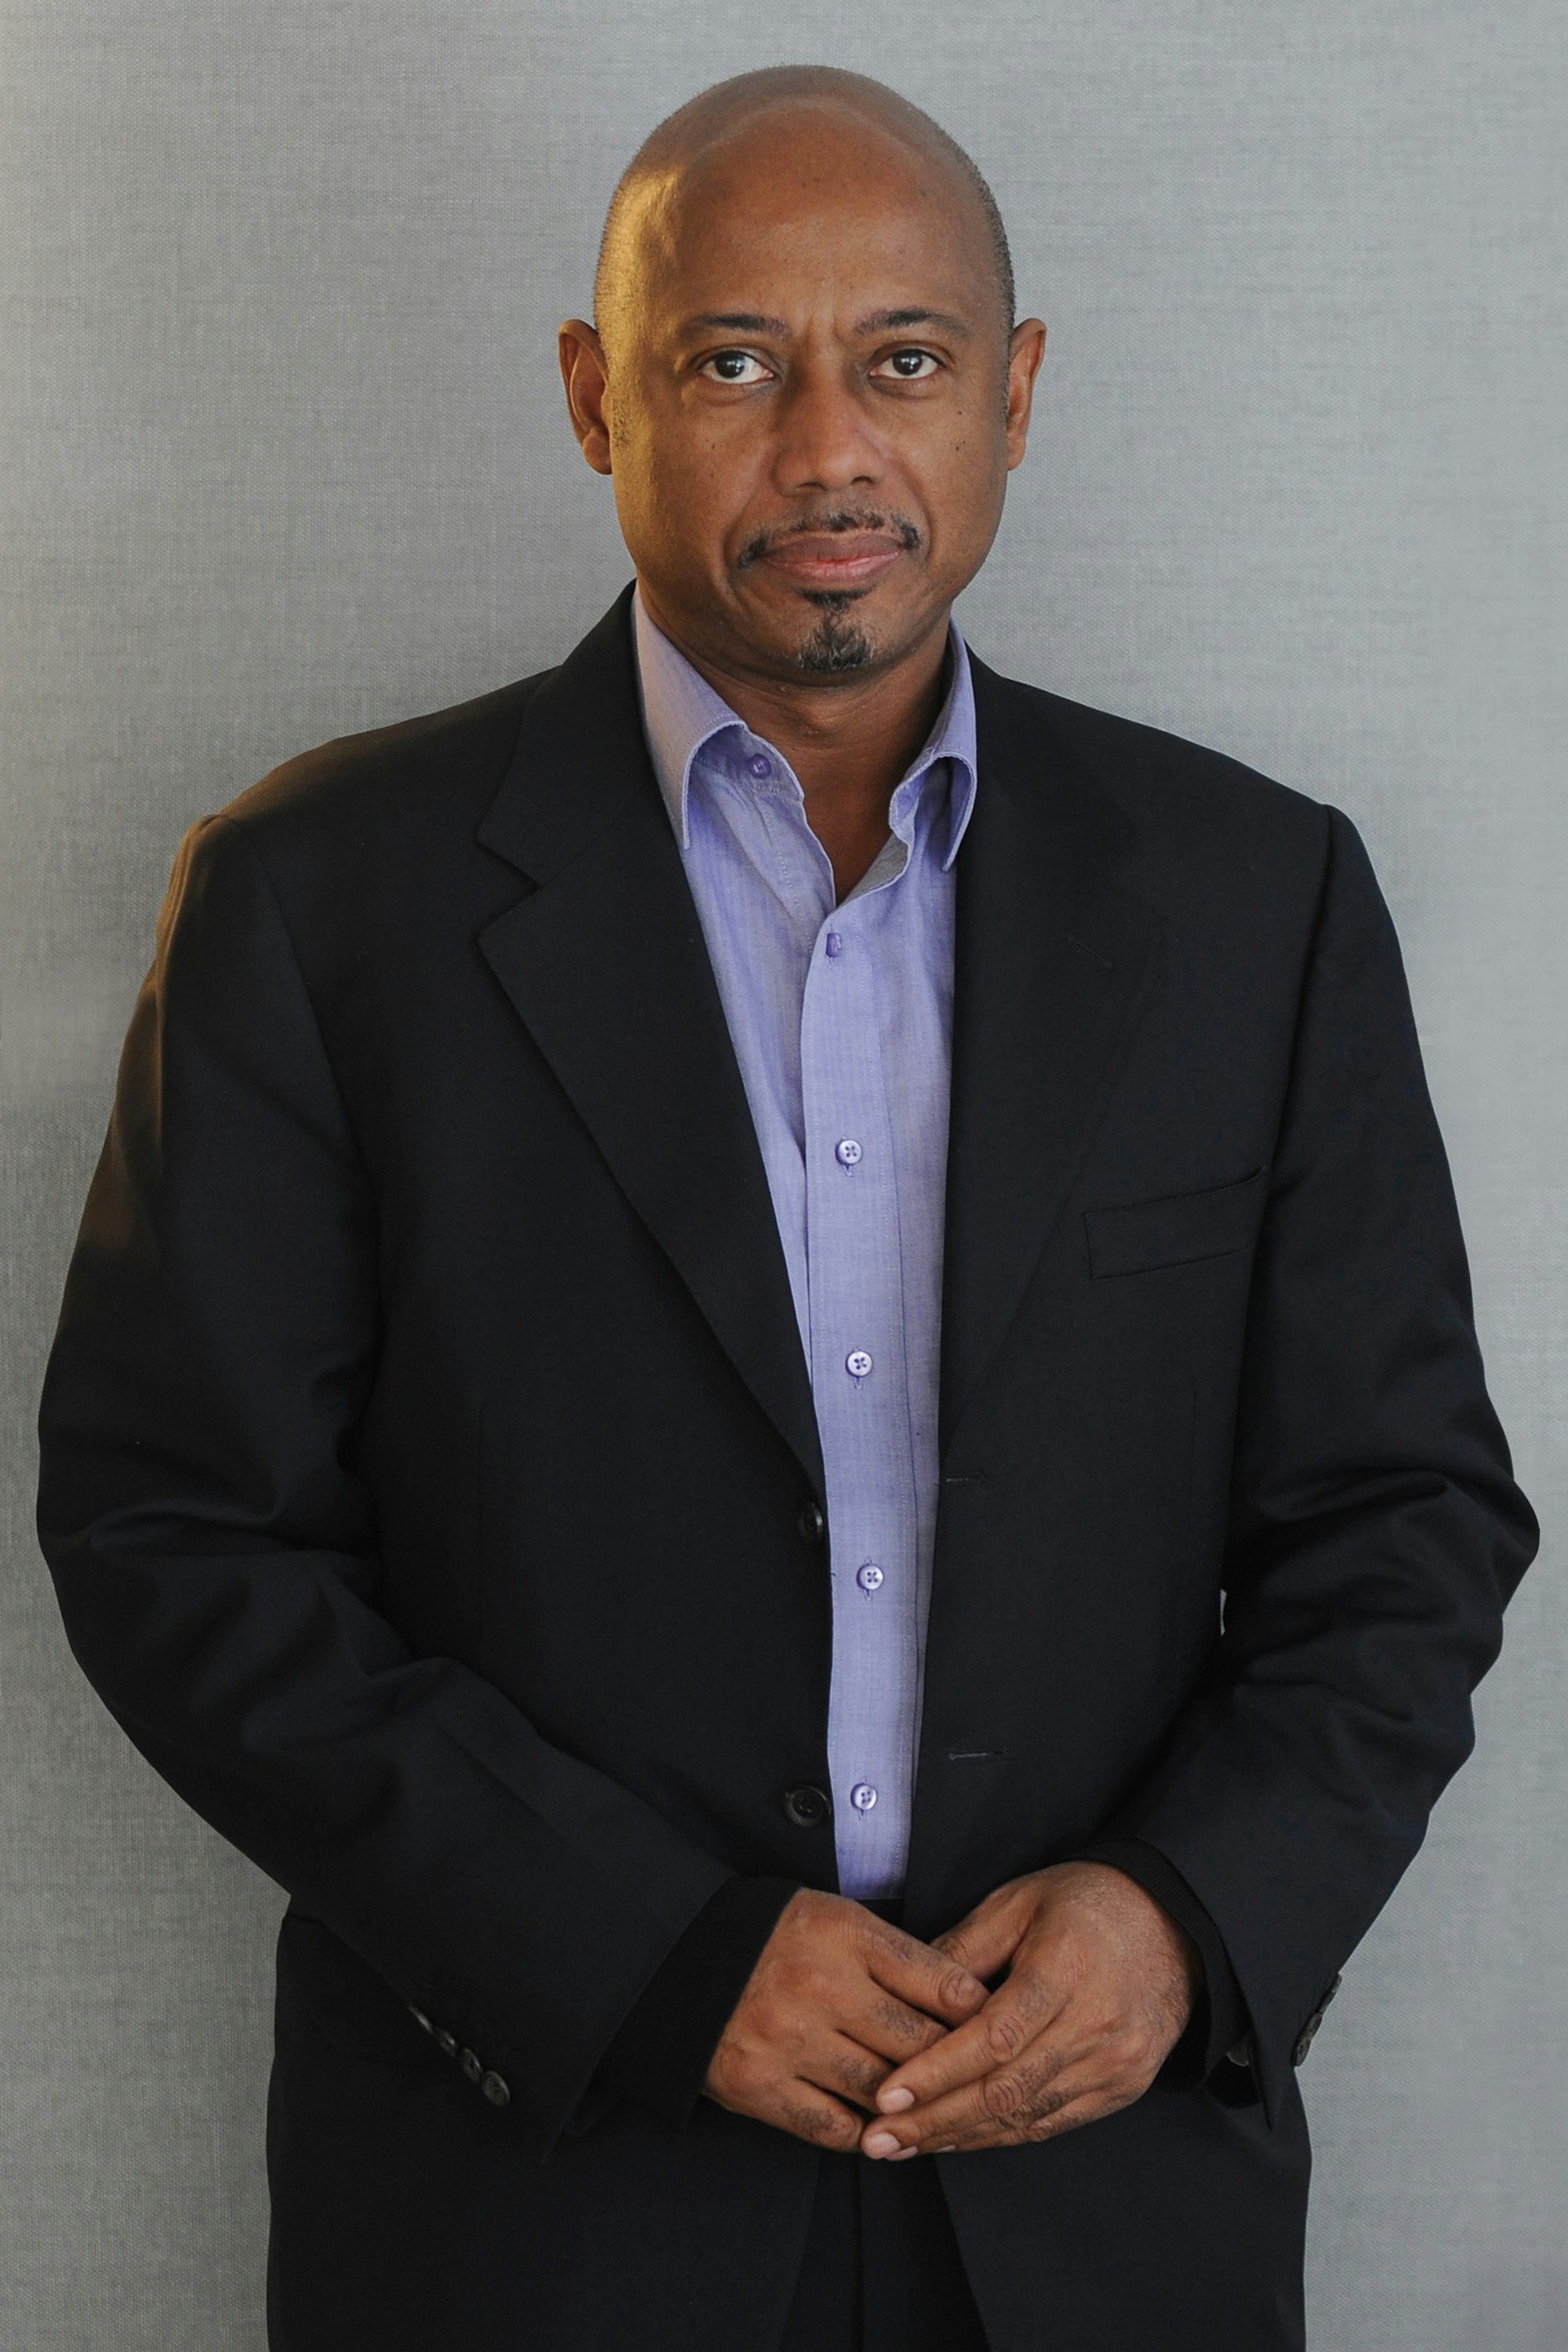 Raoul Peck. Photo by Lydie/ SIPA, courtesy of Magnolia Pictures.